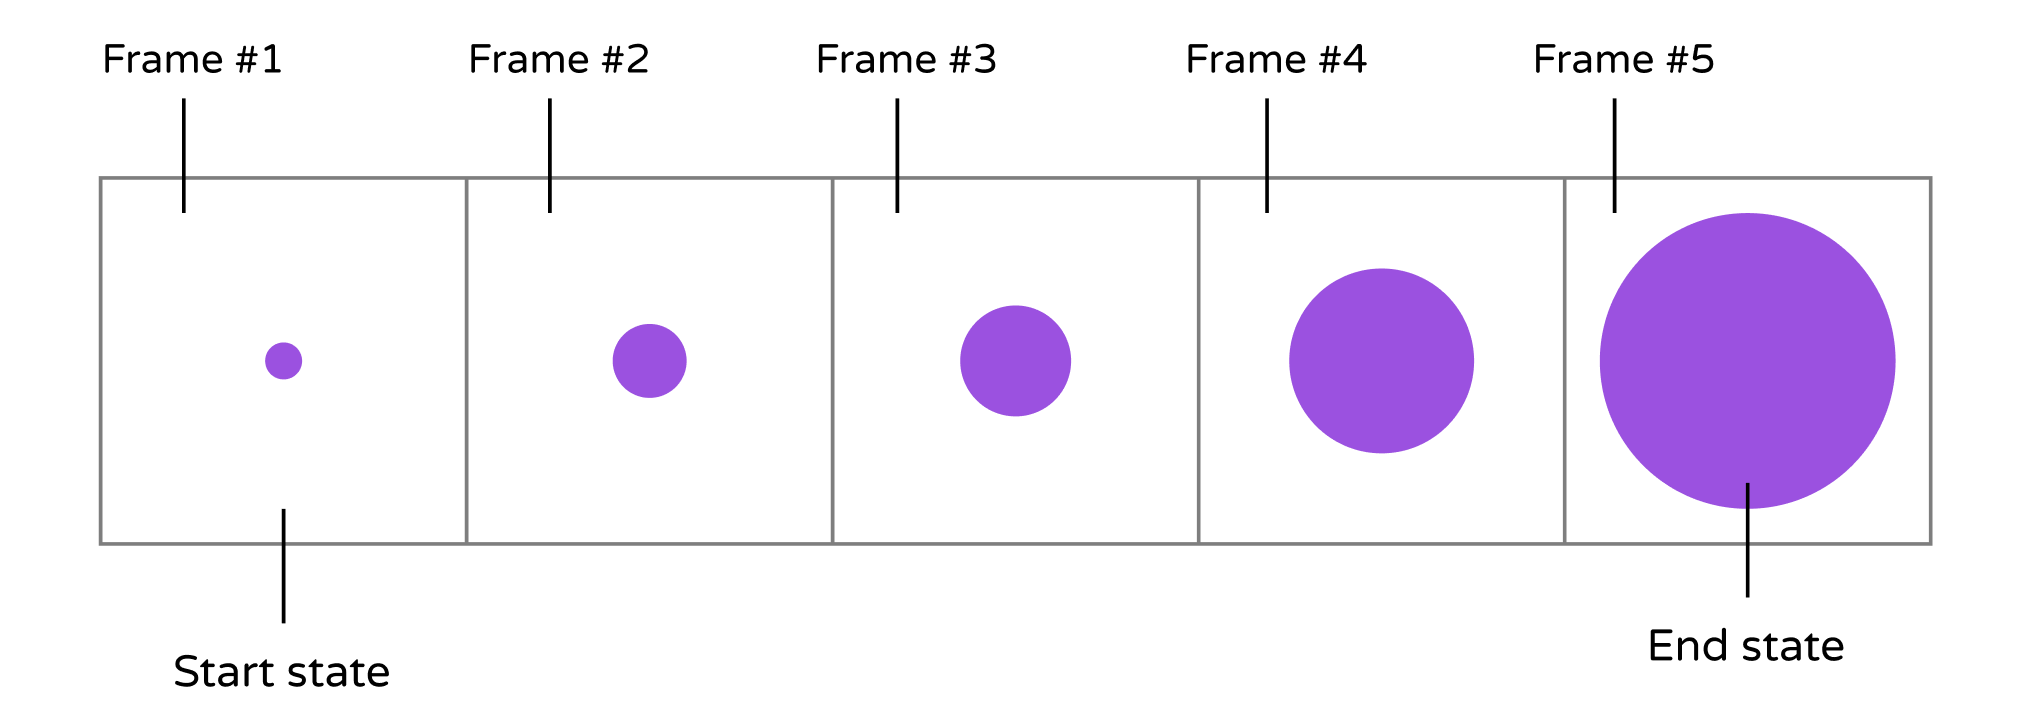 Figure 17-1. Sequence of frames for creating an animation